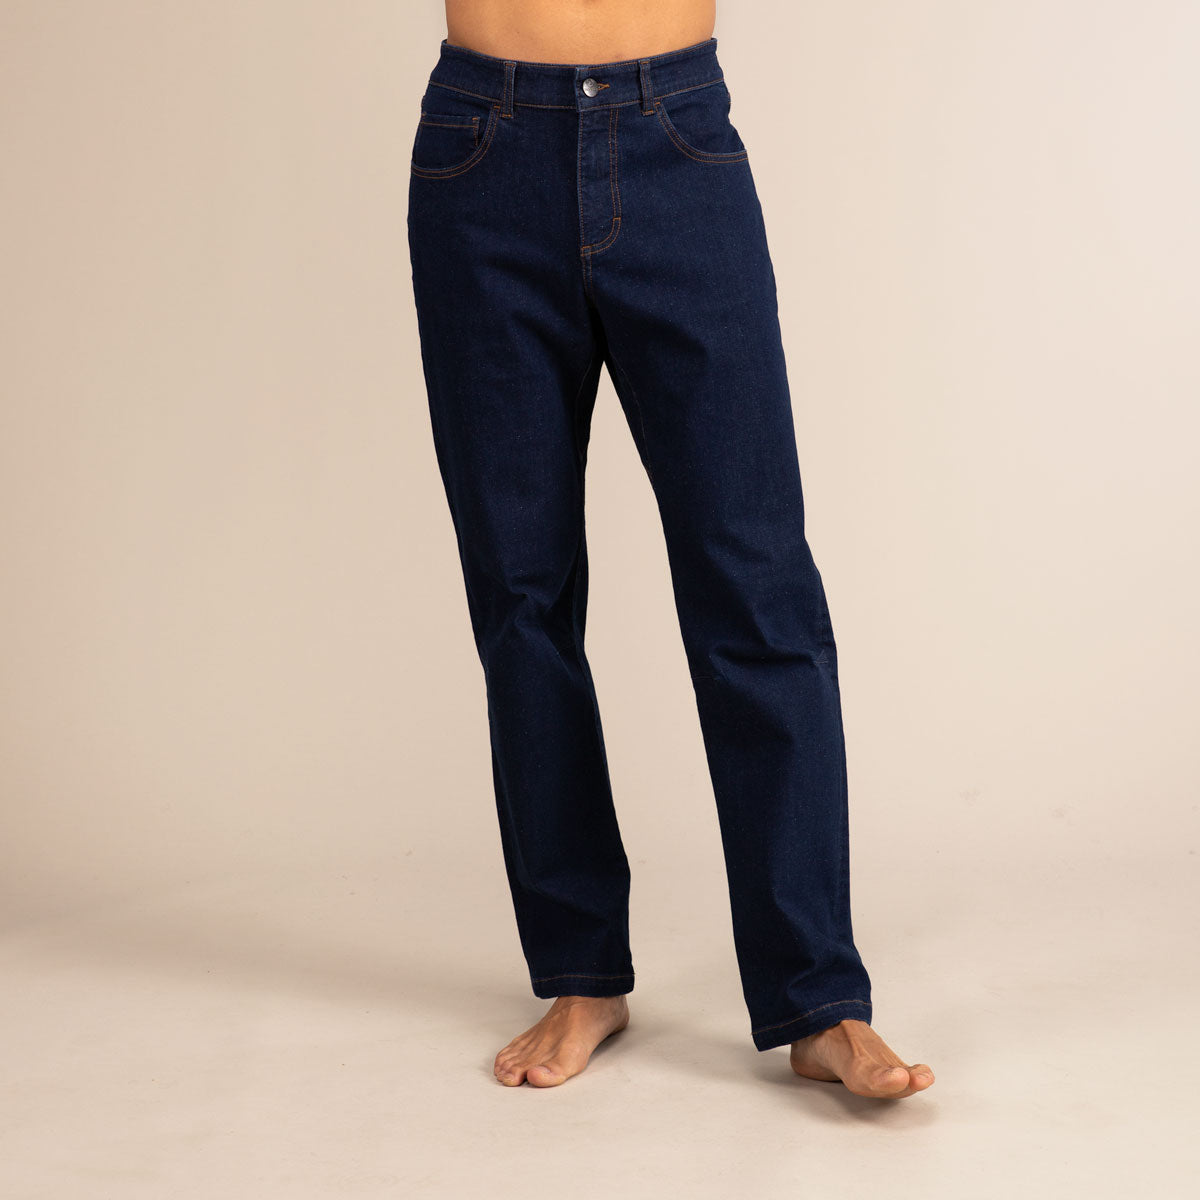 MARS JEANS | Organic Ultimate Movement Jeans | 3RD ROCK Clothing -  Donald is 6ft 1 with a 29" waist, 36" hips and wears a 30/LL, but can also wear a 28" waist for a slimmer fit.  M